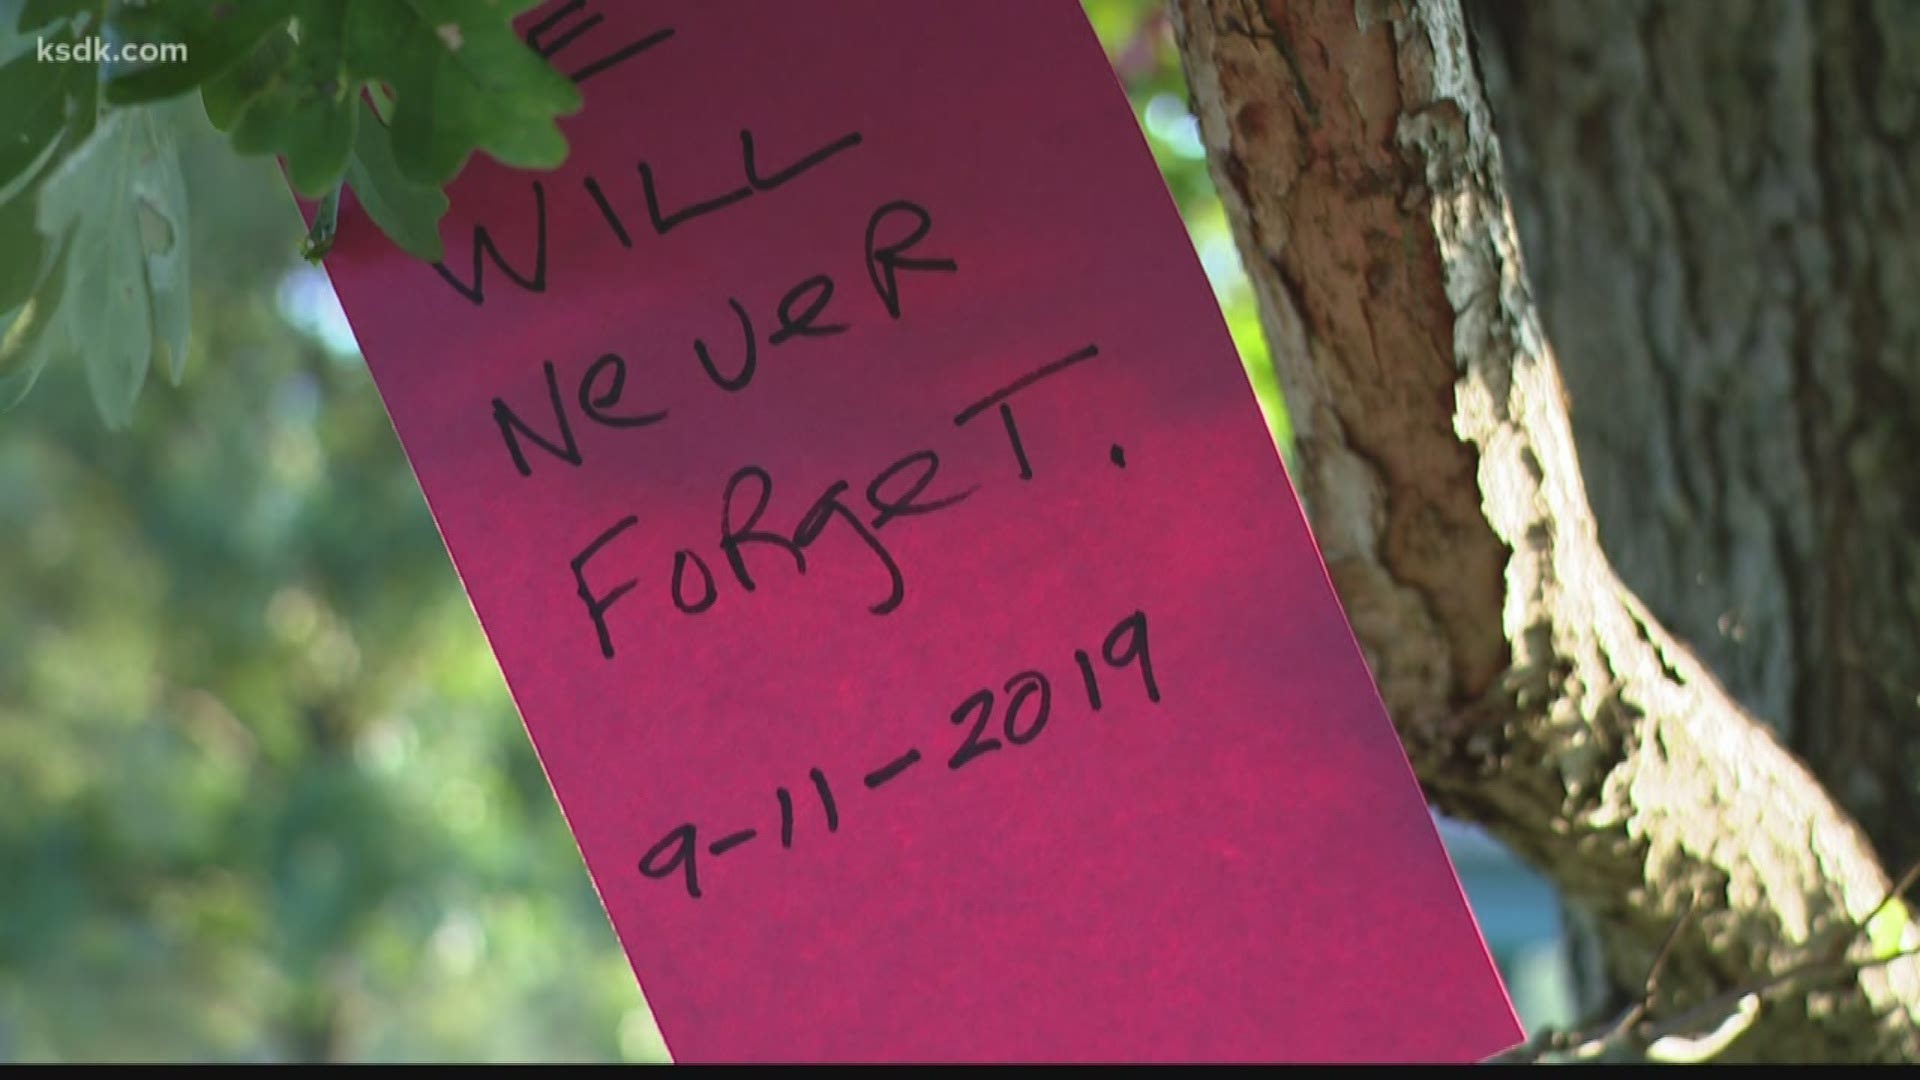 A tree was planted in Queeny Park to honor David William Nelson. A son of Kirkwood, Nelson was on the 92nd floor of the north tower on that fateful day.